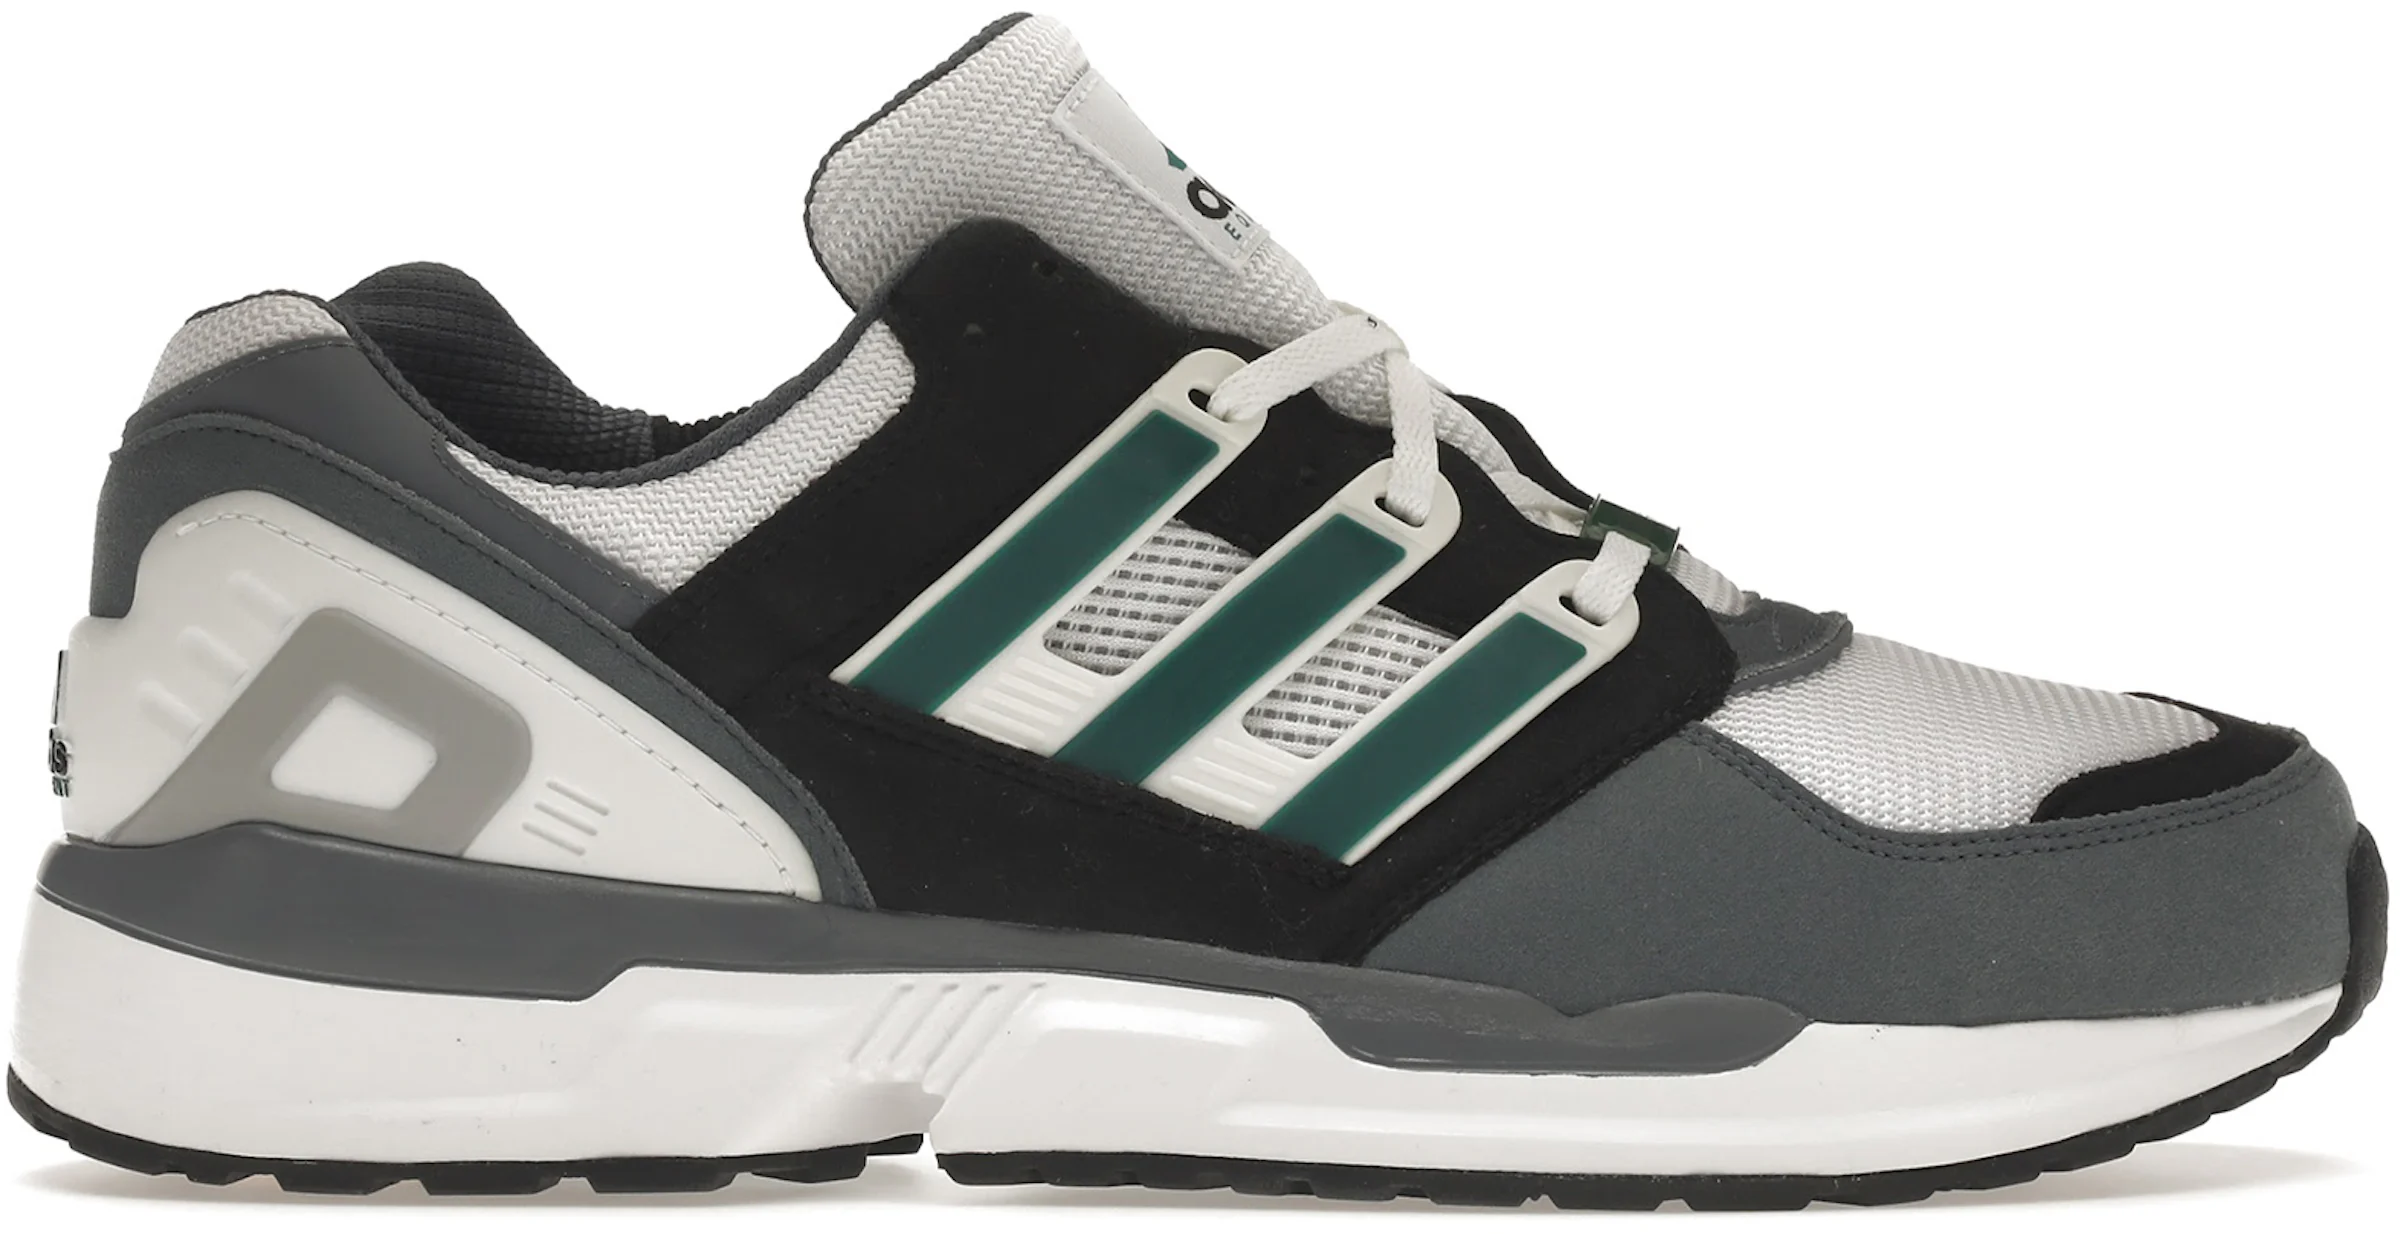 Adidas EQT Running Support White Green Lead, Chaussures Adidas Eqt